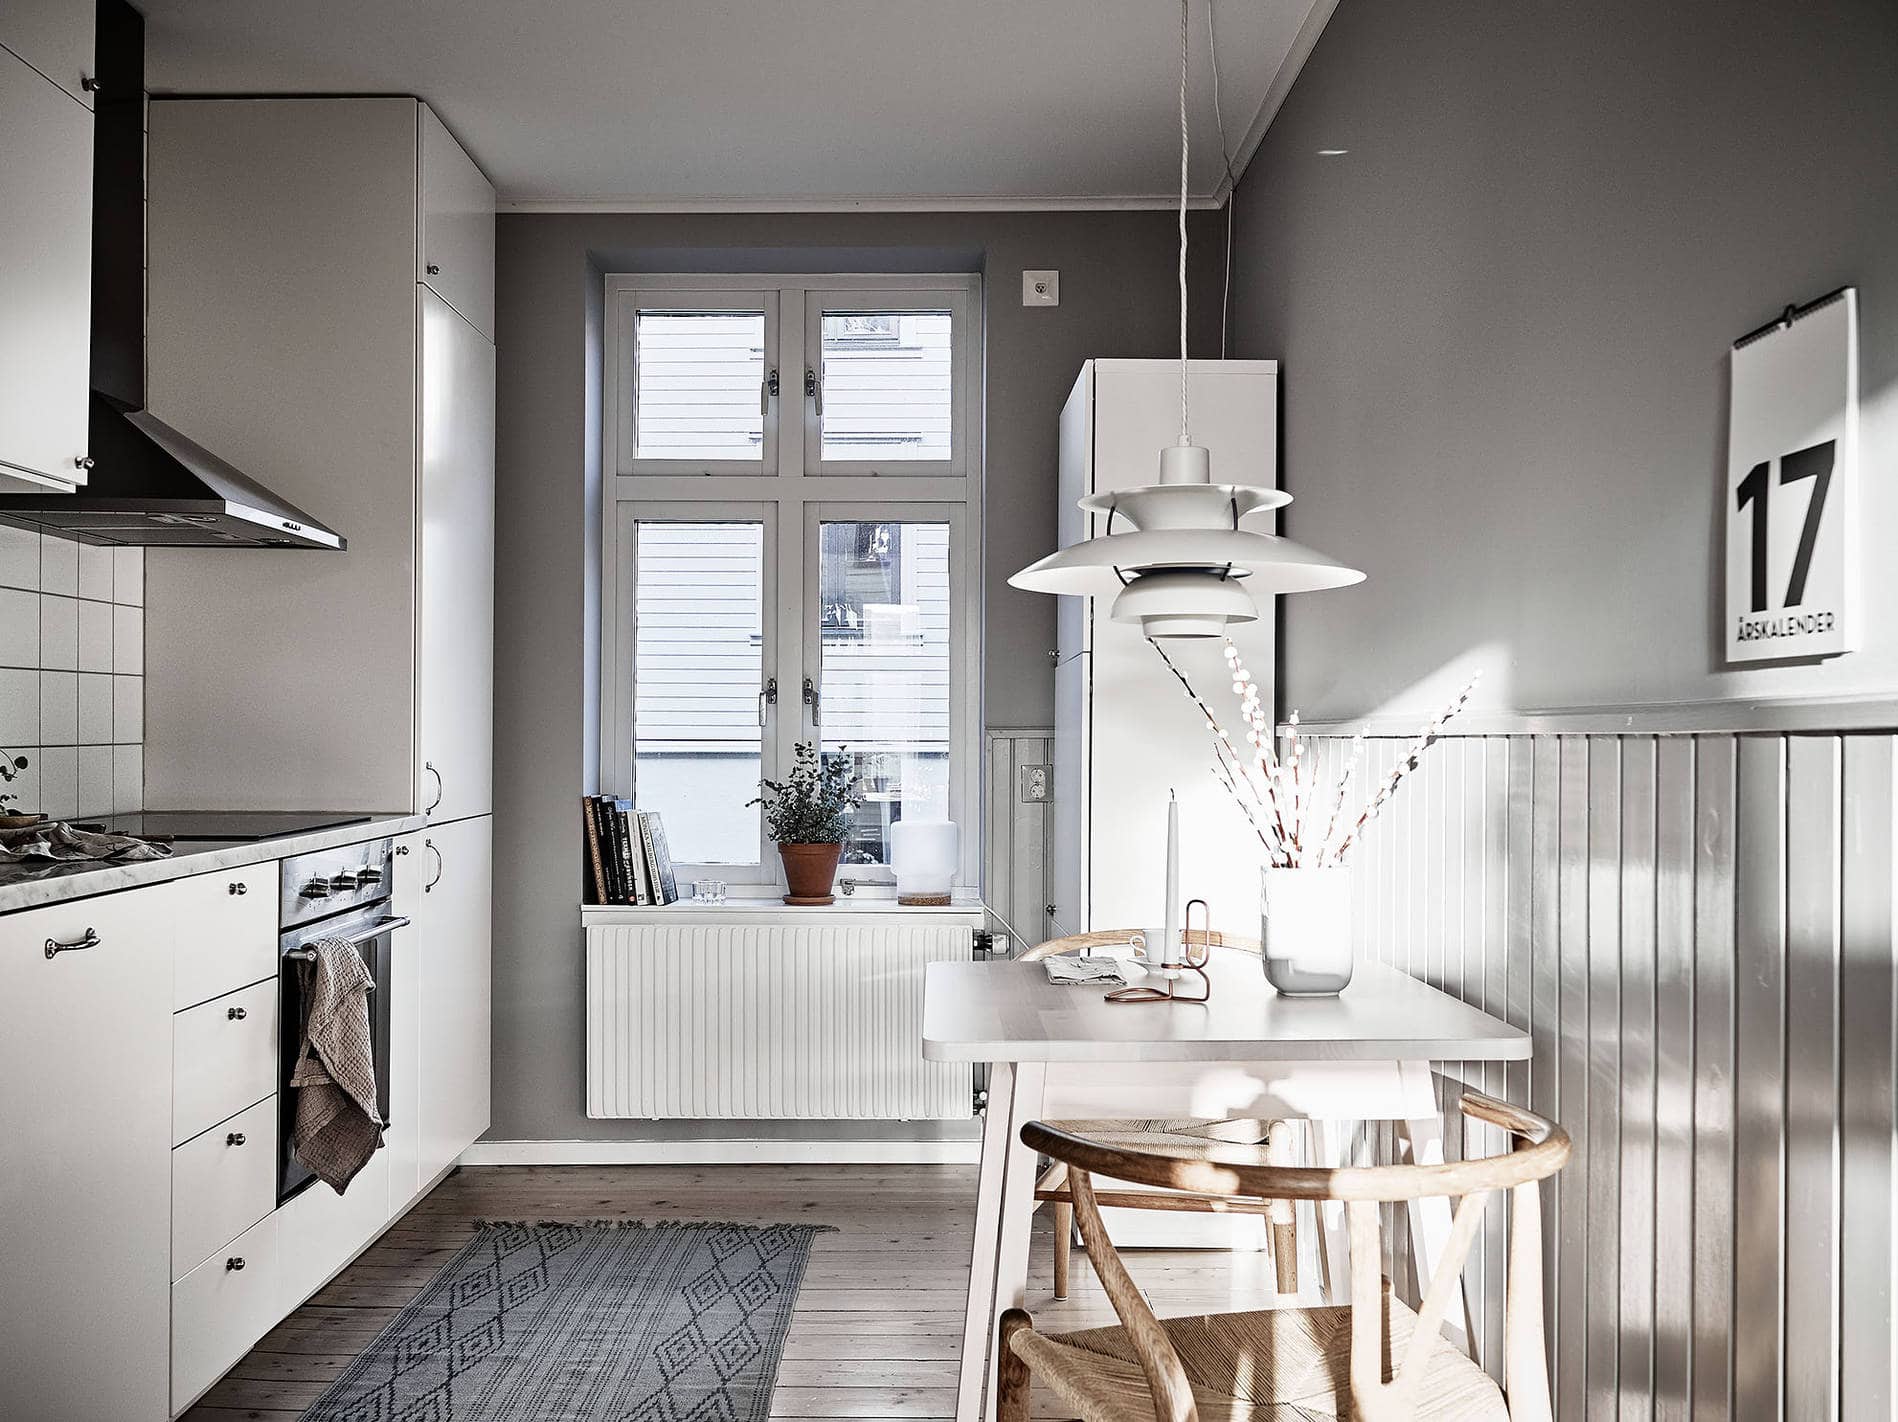 Home in grey and brown - via Coco Lapine Design